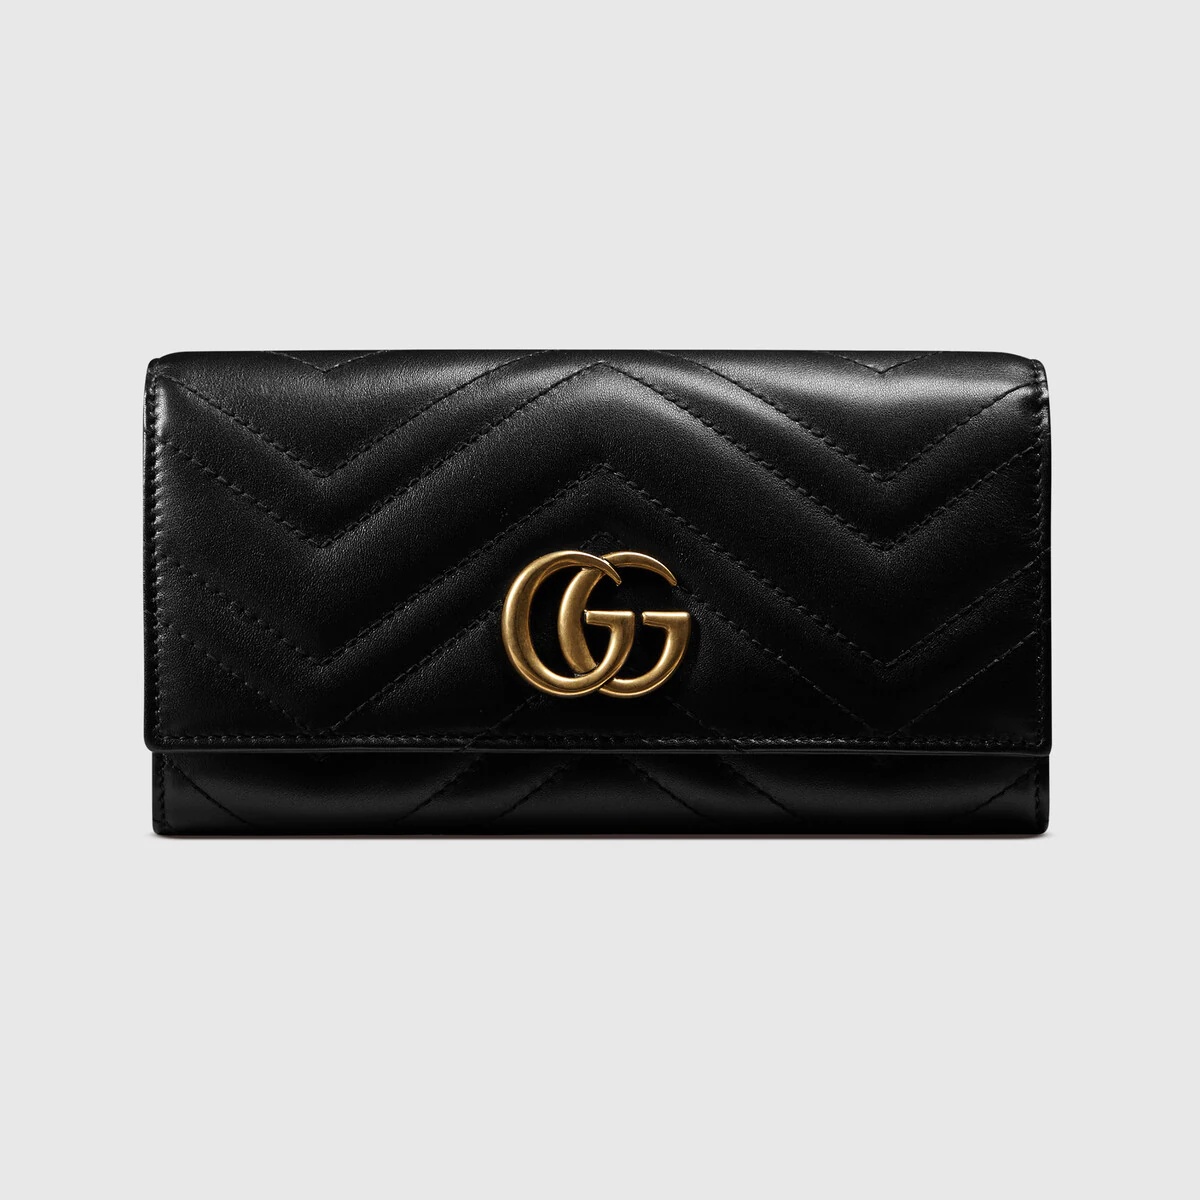 GG Marmont continental wallet - 1